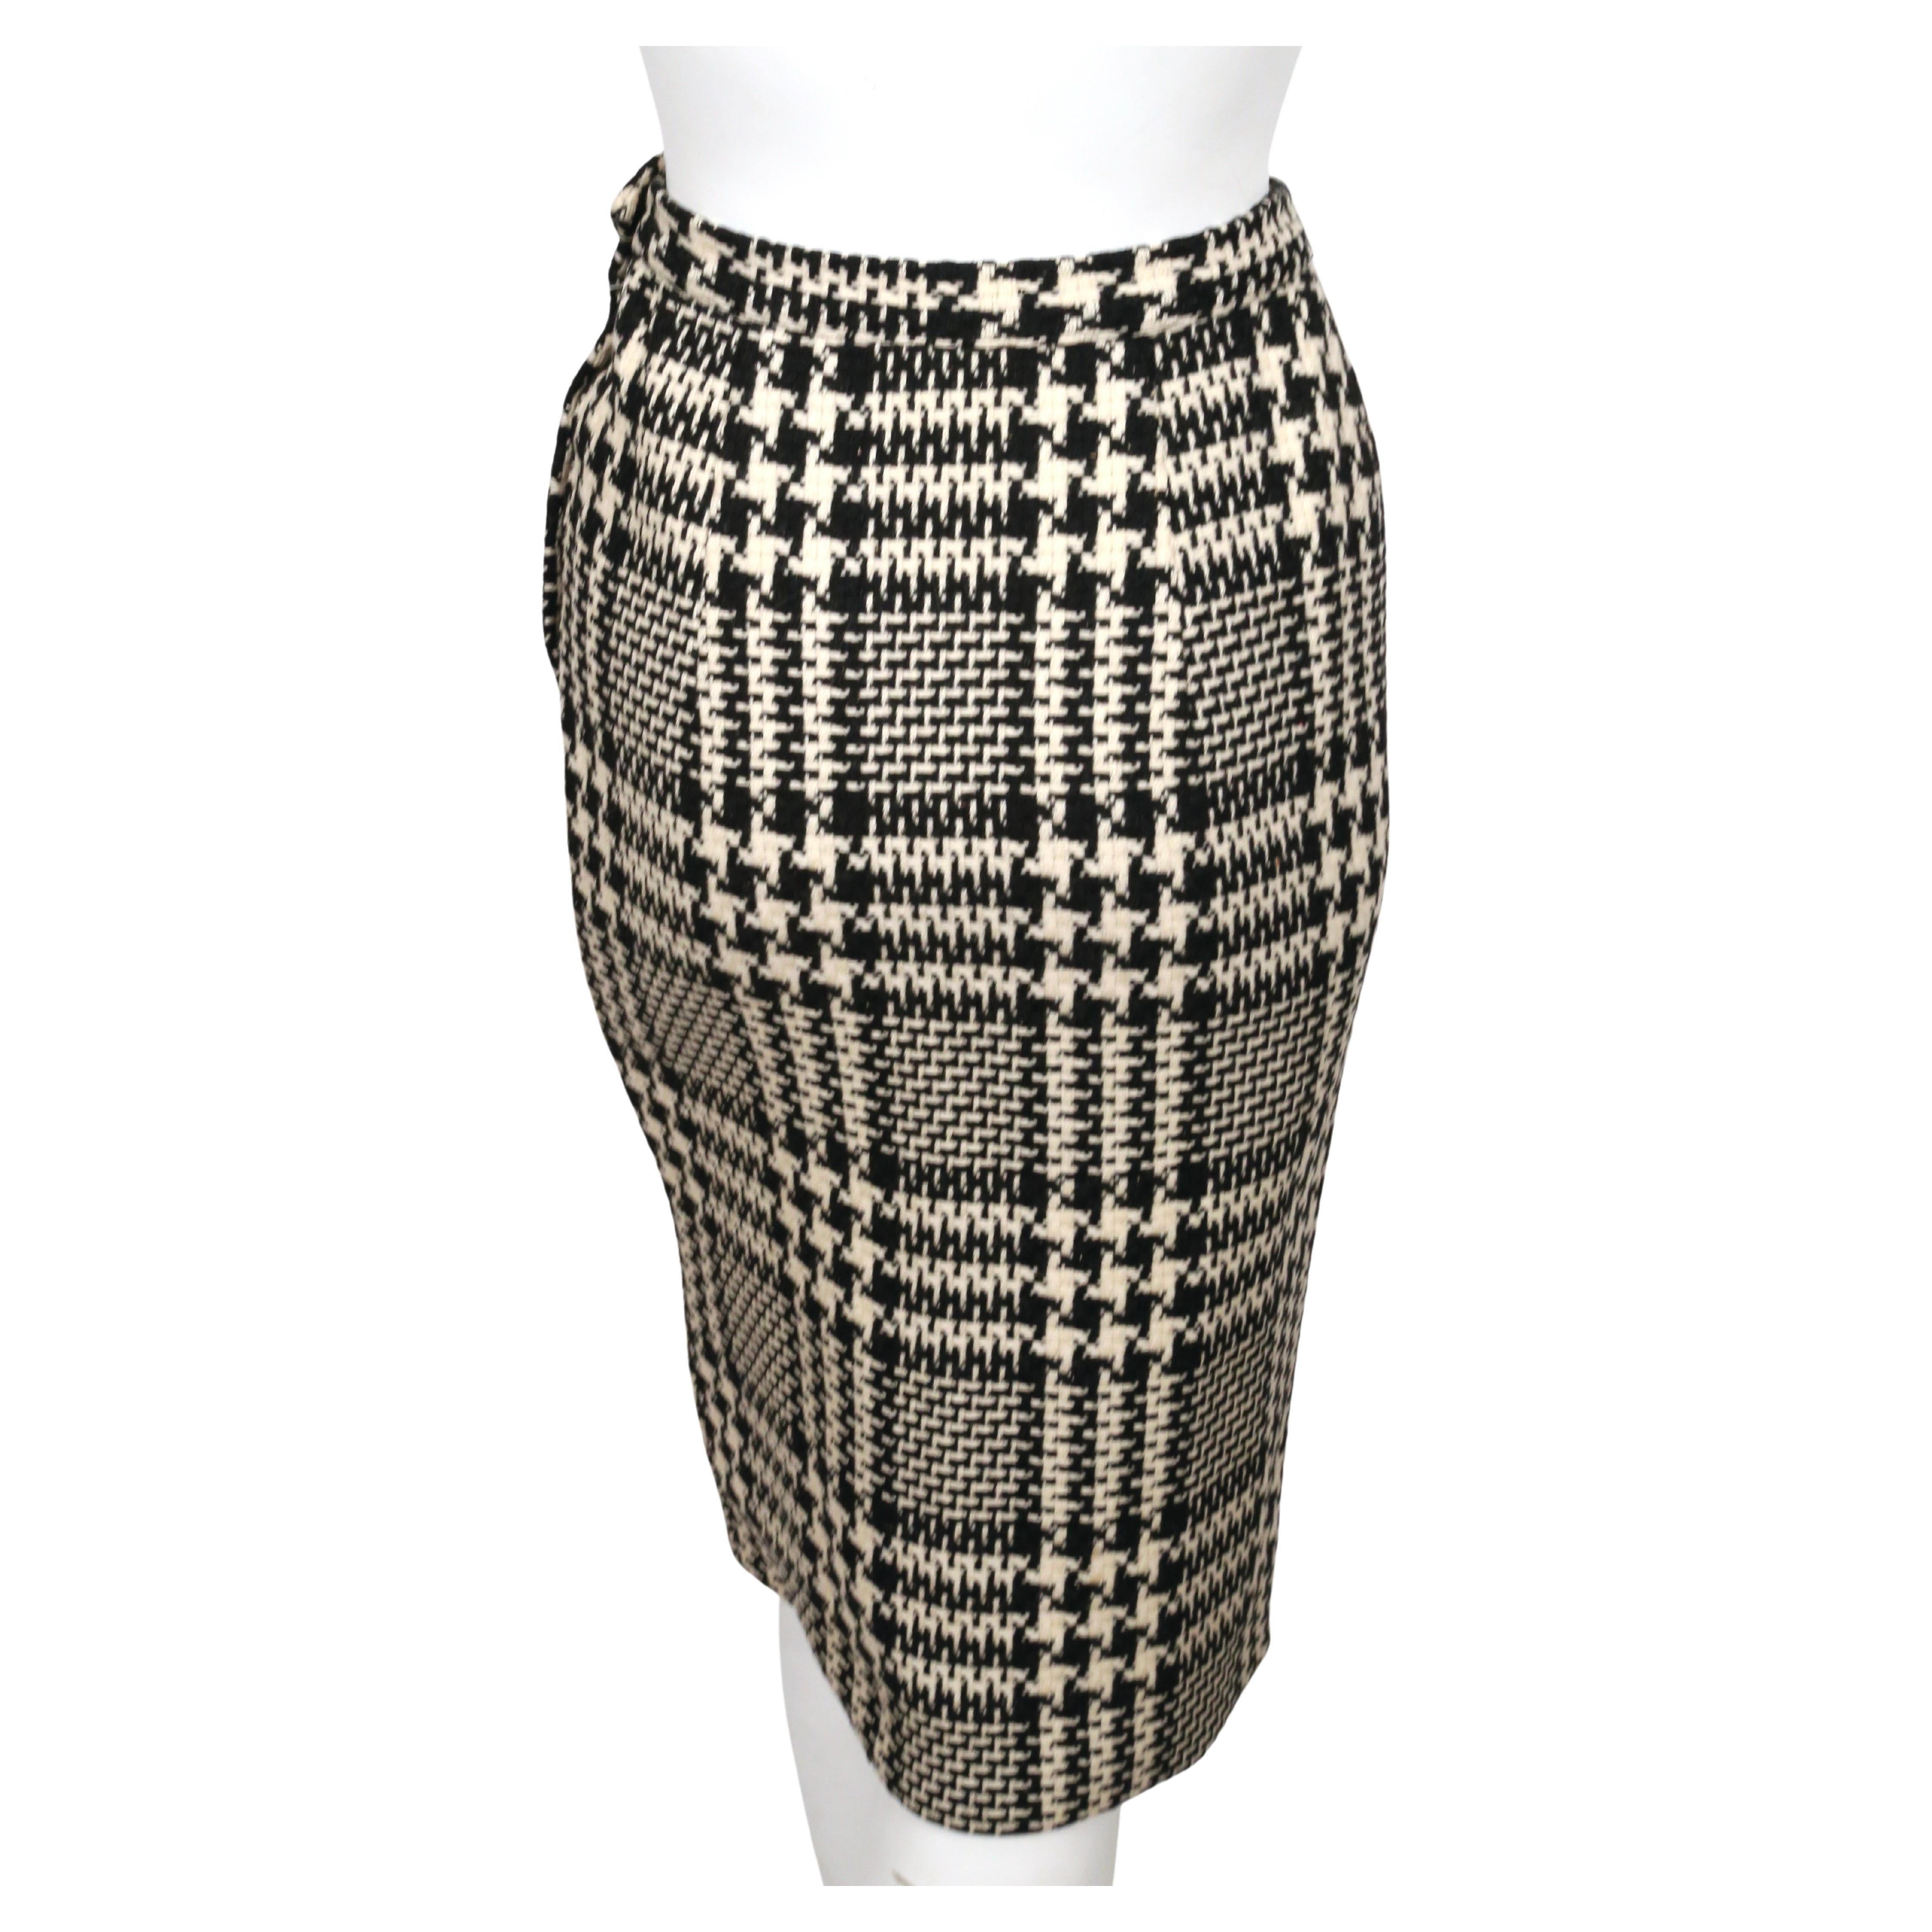 1960's JOSEPH MAGNIN wool houndstooth swing coat with neck tie & skirt For Sale 4